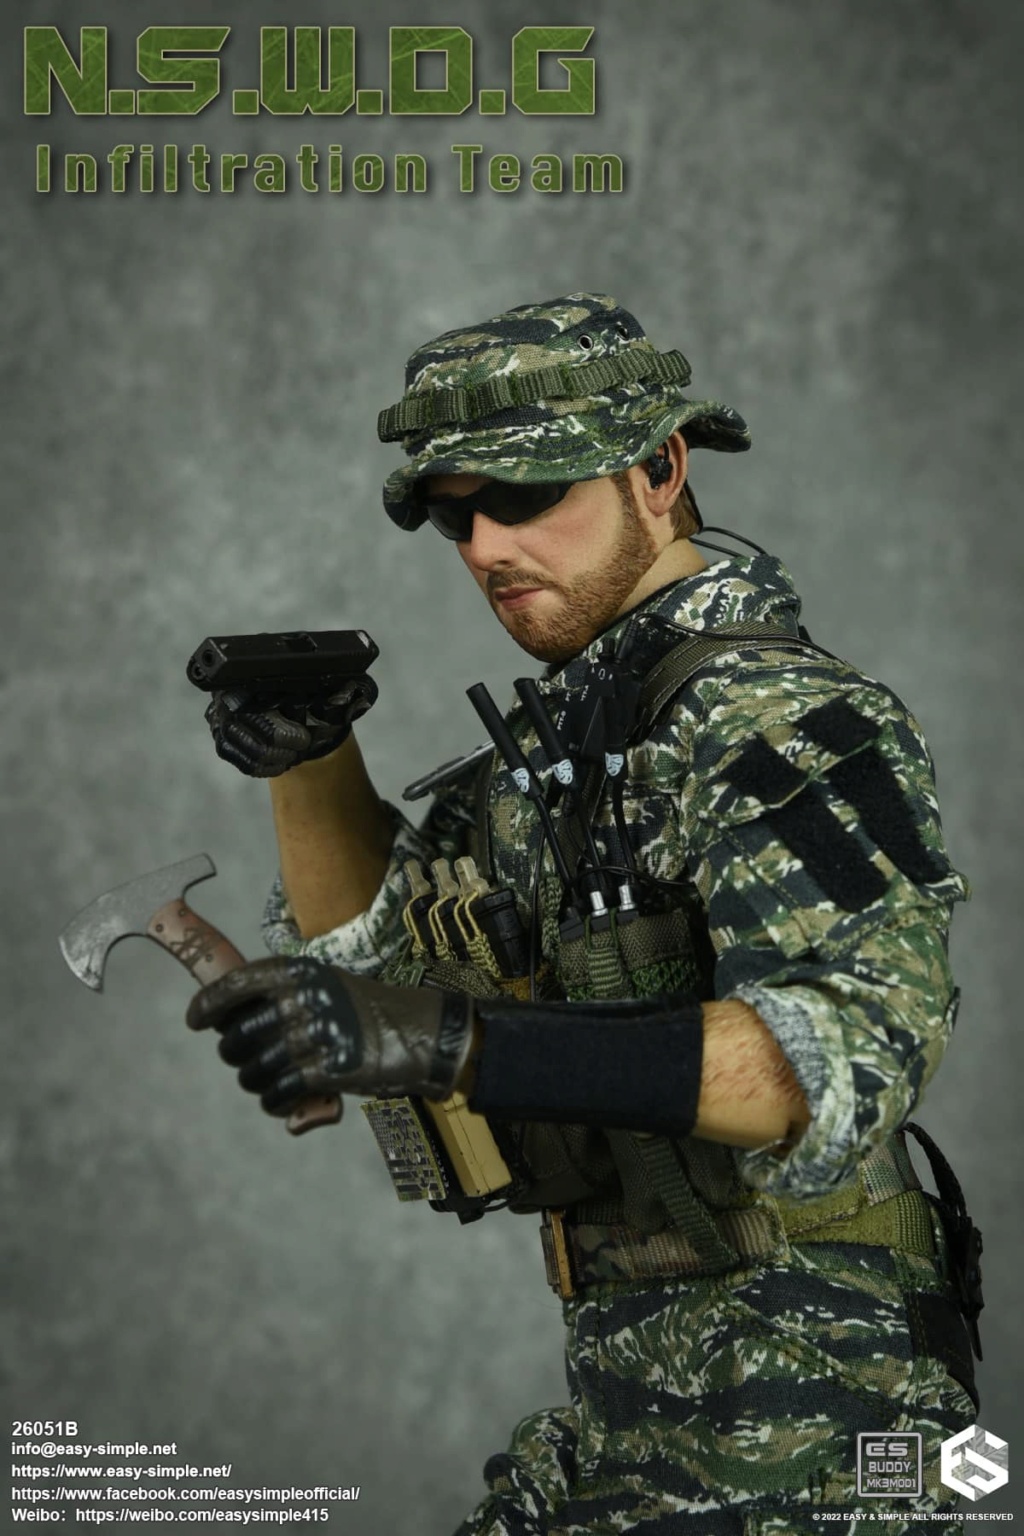 NEW PRODUCT: EASY AND SIMPLE 1/6 SCALE FIGURE: N.S.W.D.G INFILTRATION TEAM - (2 Versions) 11857